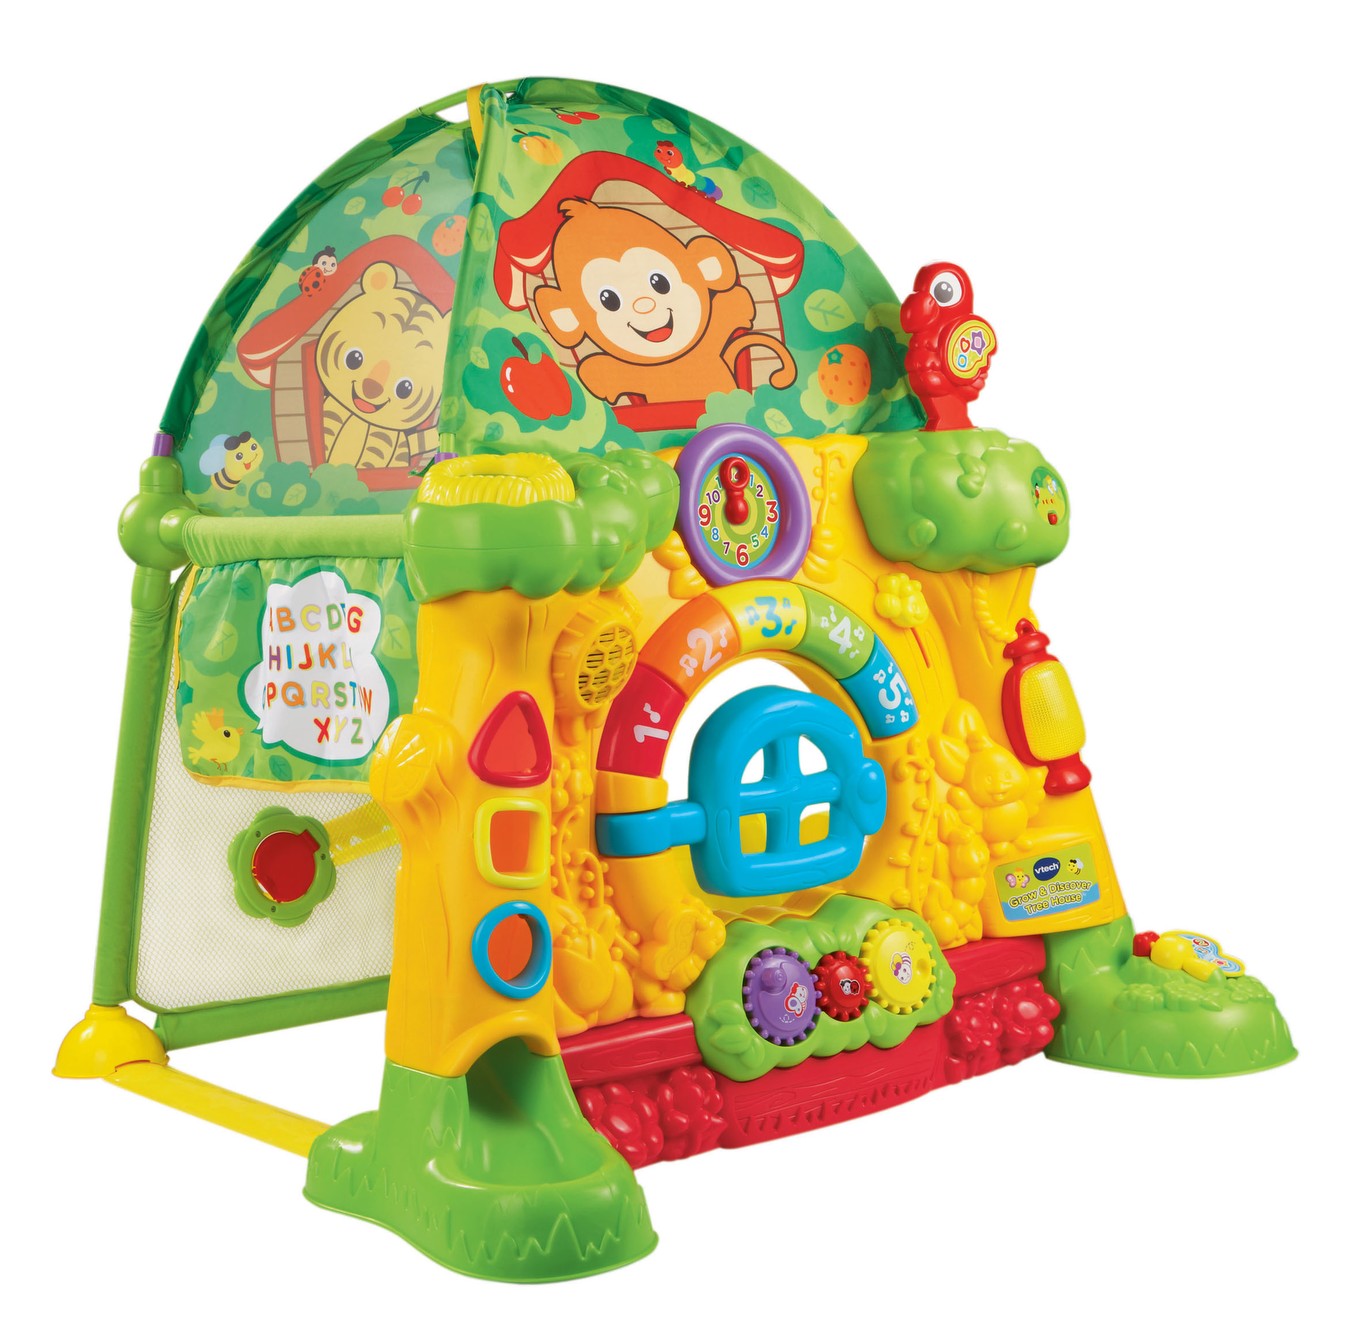 vtech sit to stand dancing tower target